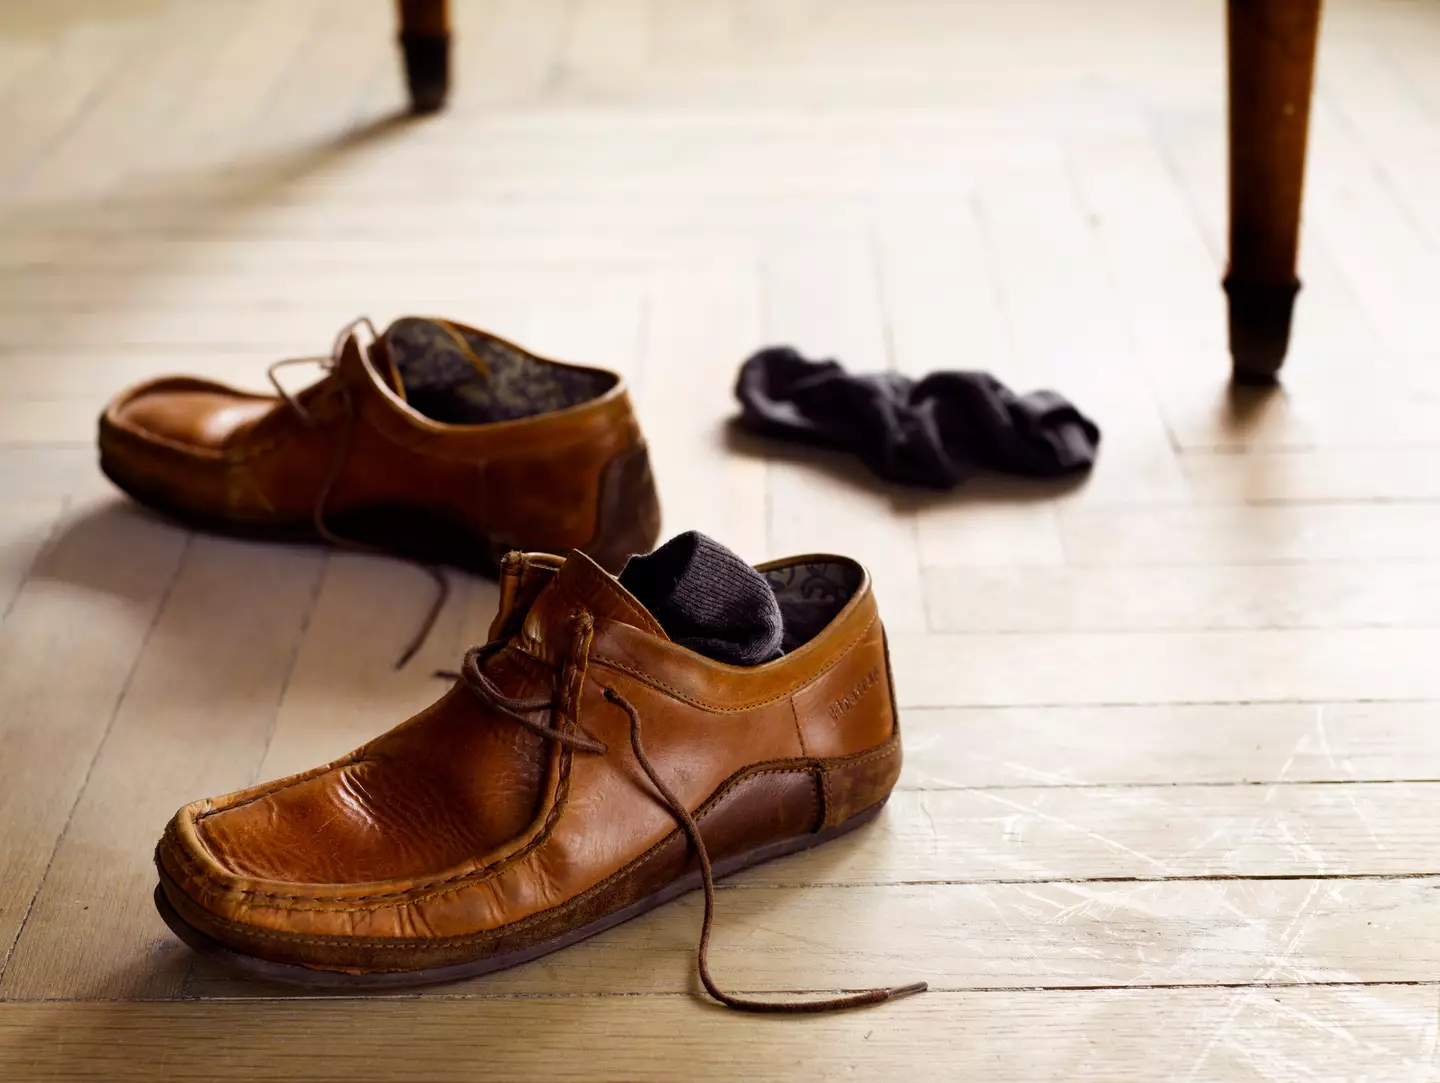 "Yes, the shoes are under the table but I'll need them again soon so in a while they won't be." (Getty Stock Photo)